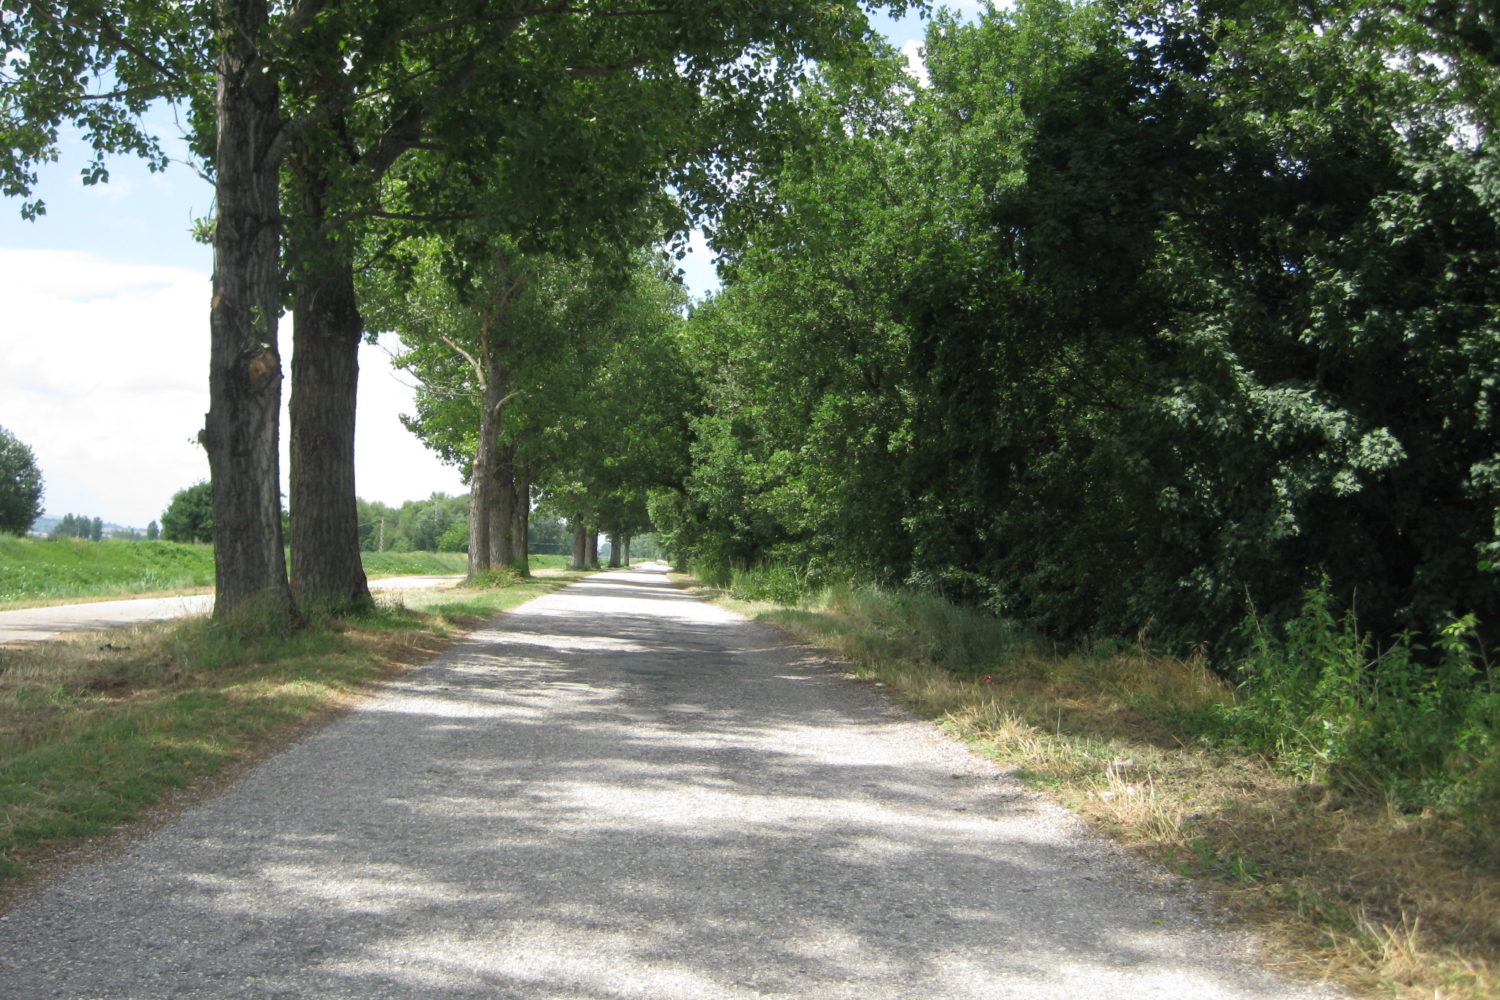 Cycling through the shade of trees in Piedmont